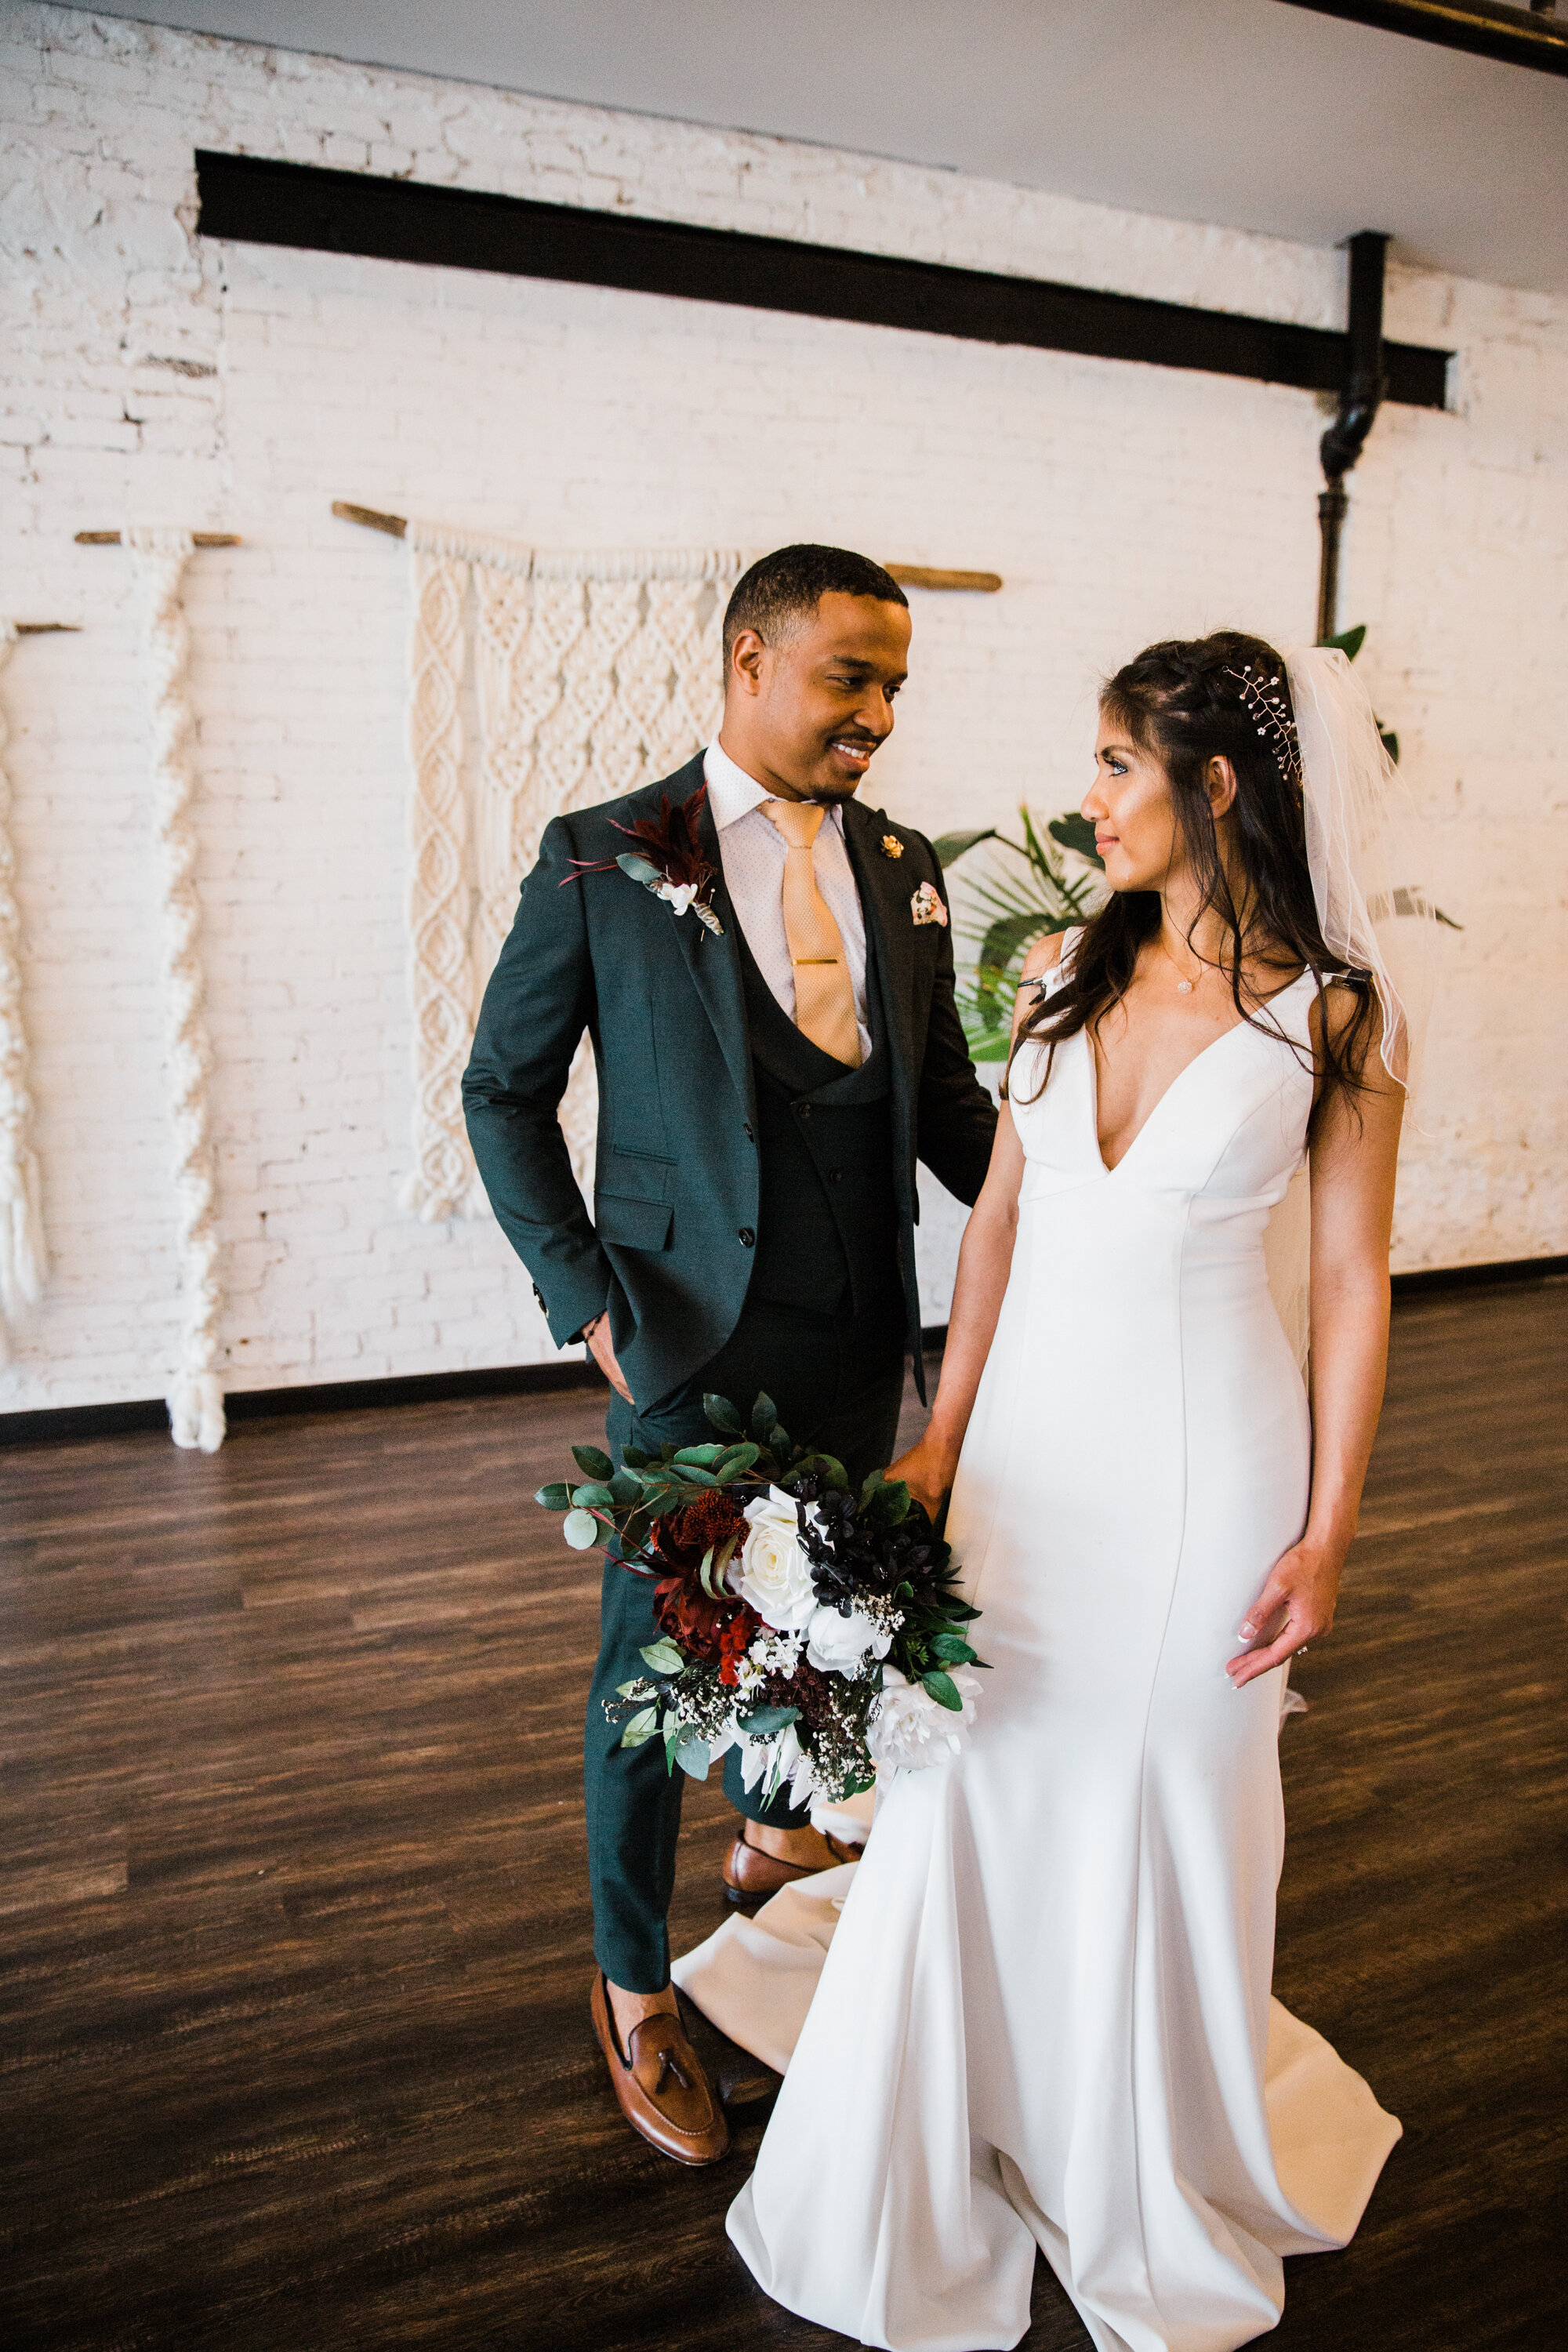 Ruby and Emerald Wedding at Habitat at Seya shot by Megapixels Media Top Wedding Photographers in Baltimore Maryland DCMulticultural Couple styled shoot (108 of 136).jpg